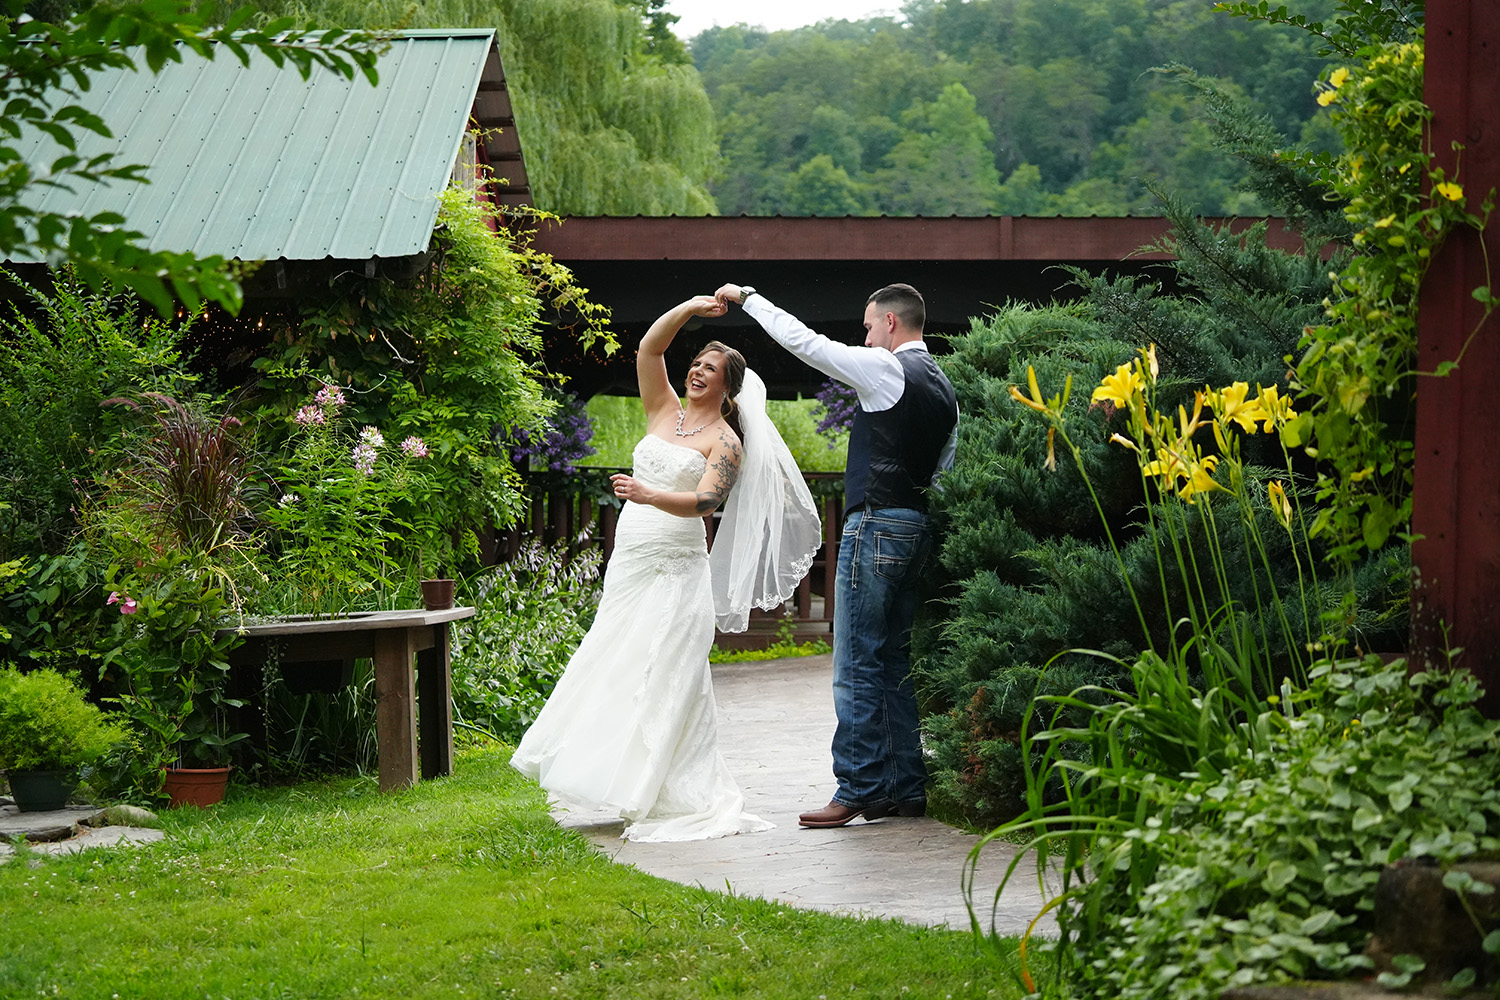 Wedding couple twirling in a country garden at Honeysuckle Hills in Pigeon Forge